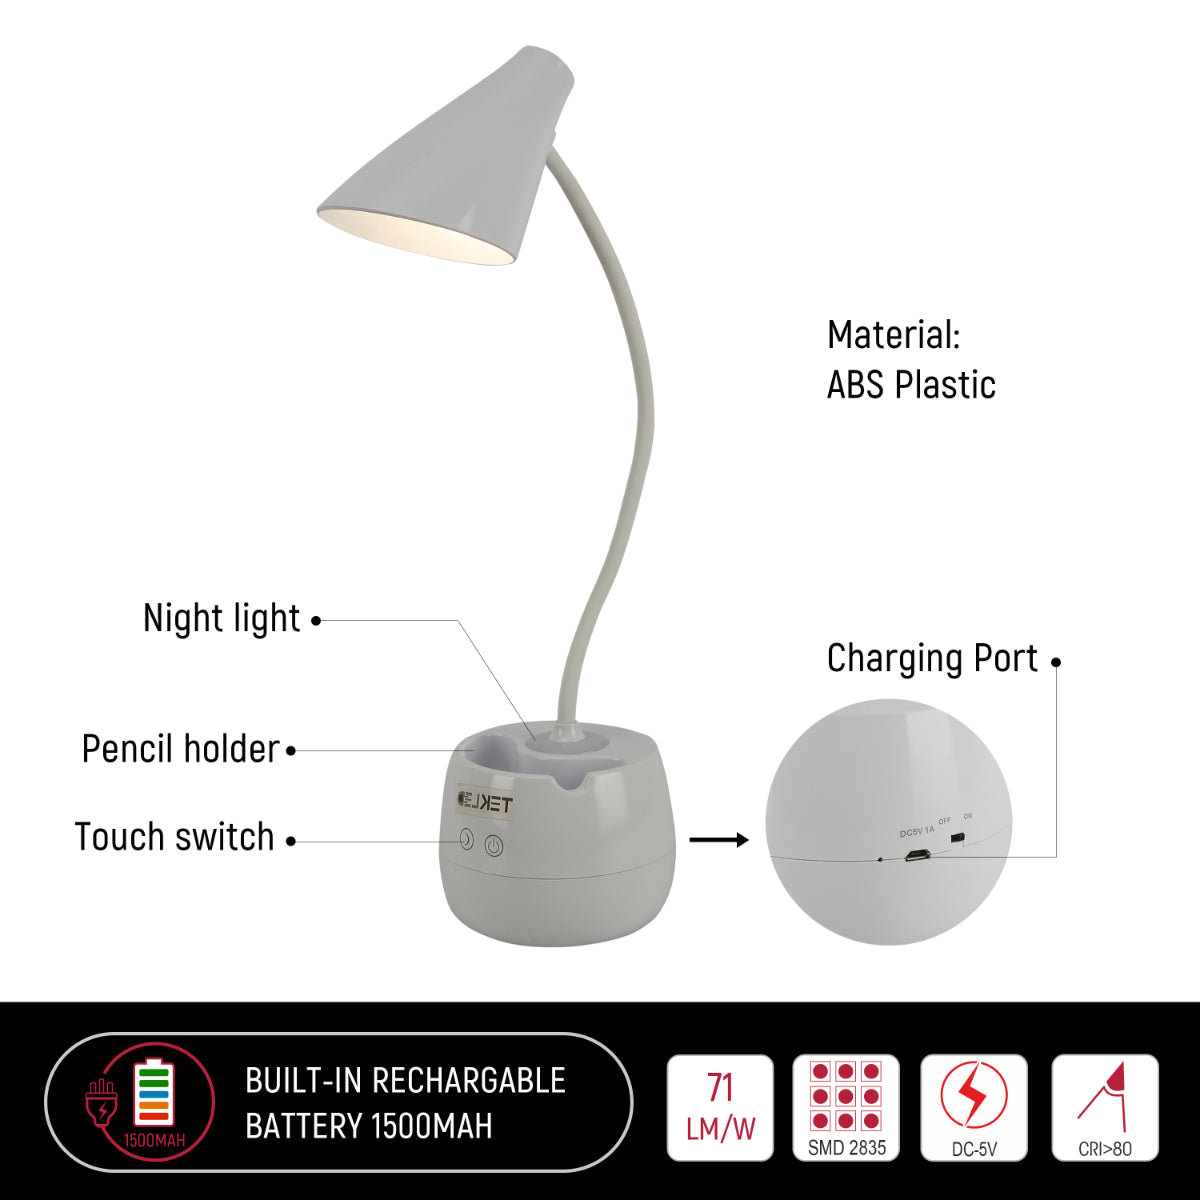 Technical specs of Rechargeable Gooseneck Desk Lamp with Cone Head and Pencil Holder 130-03761